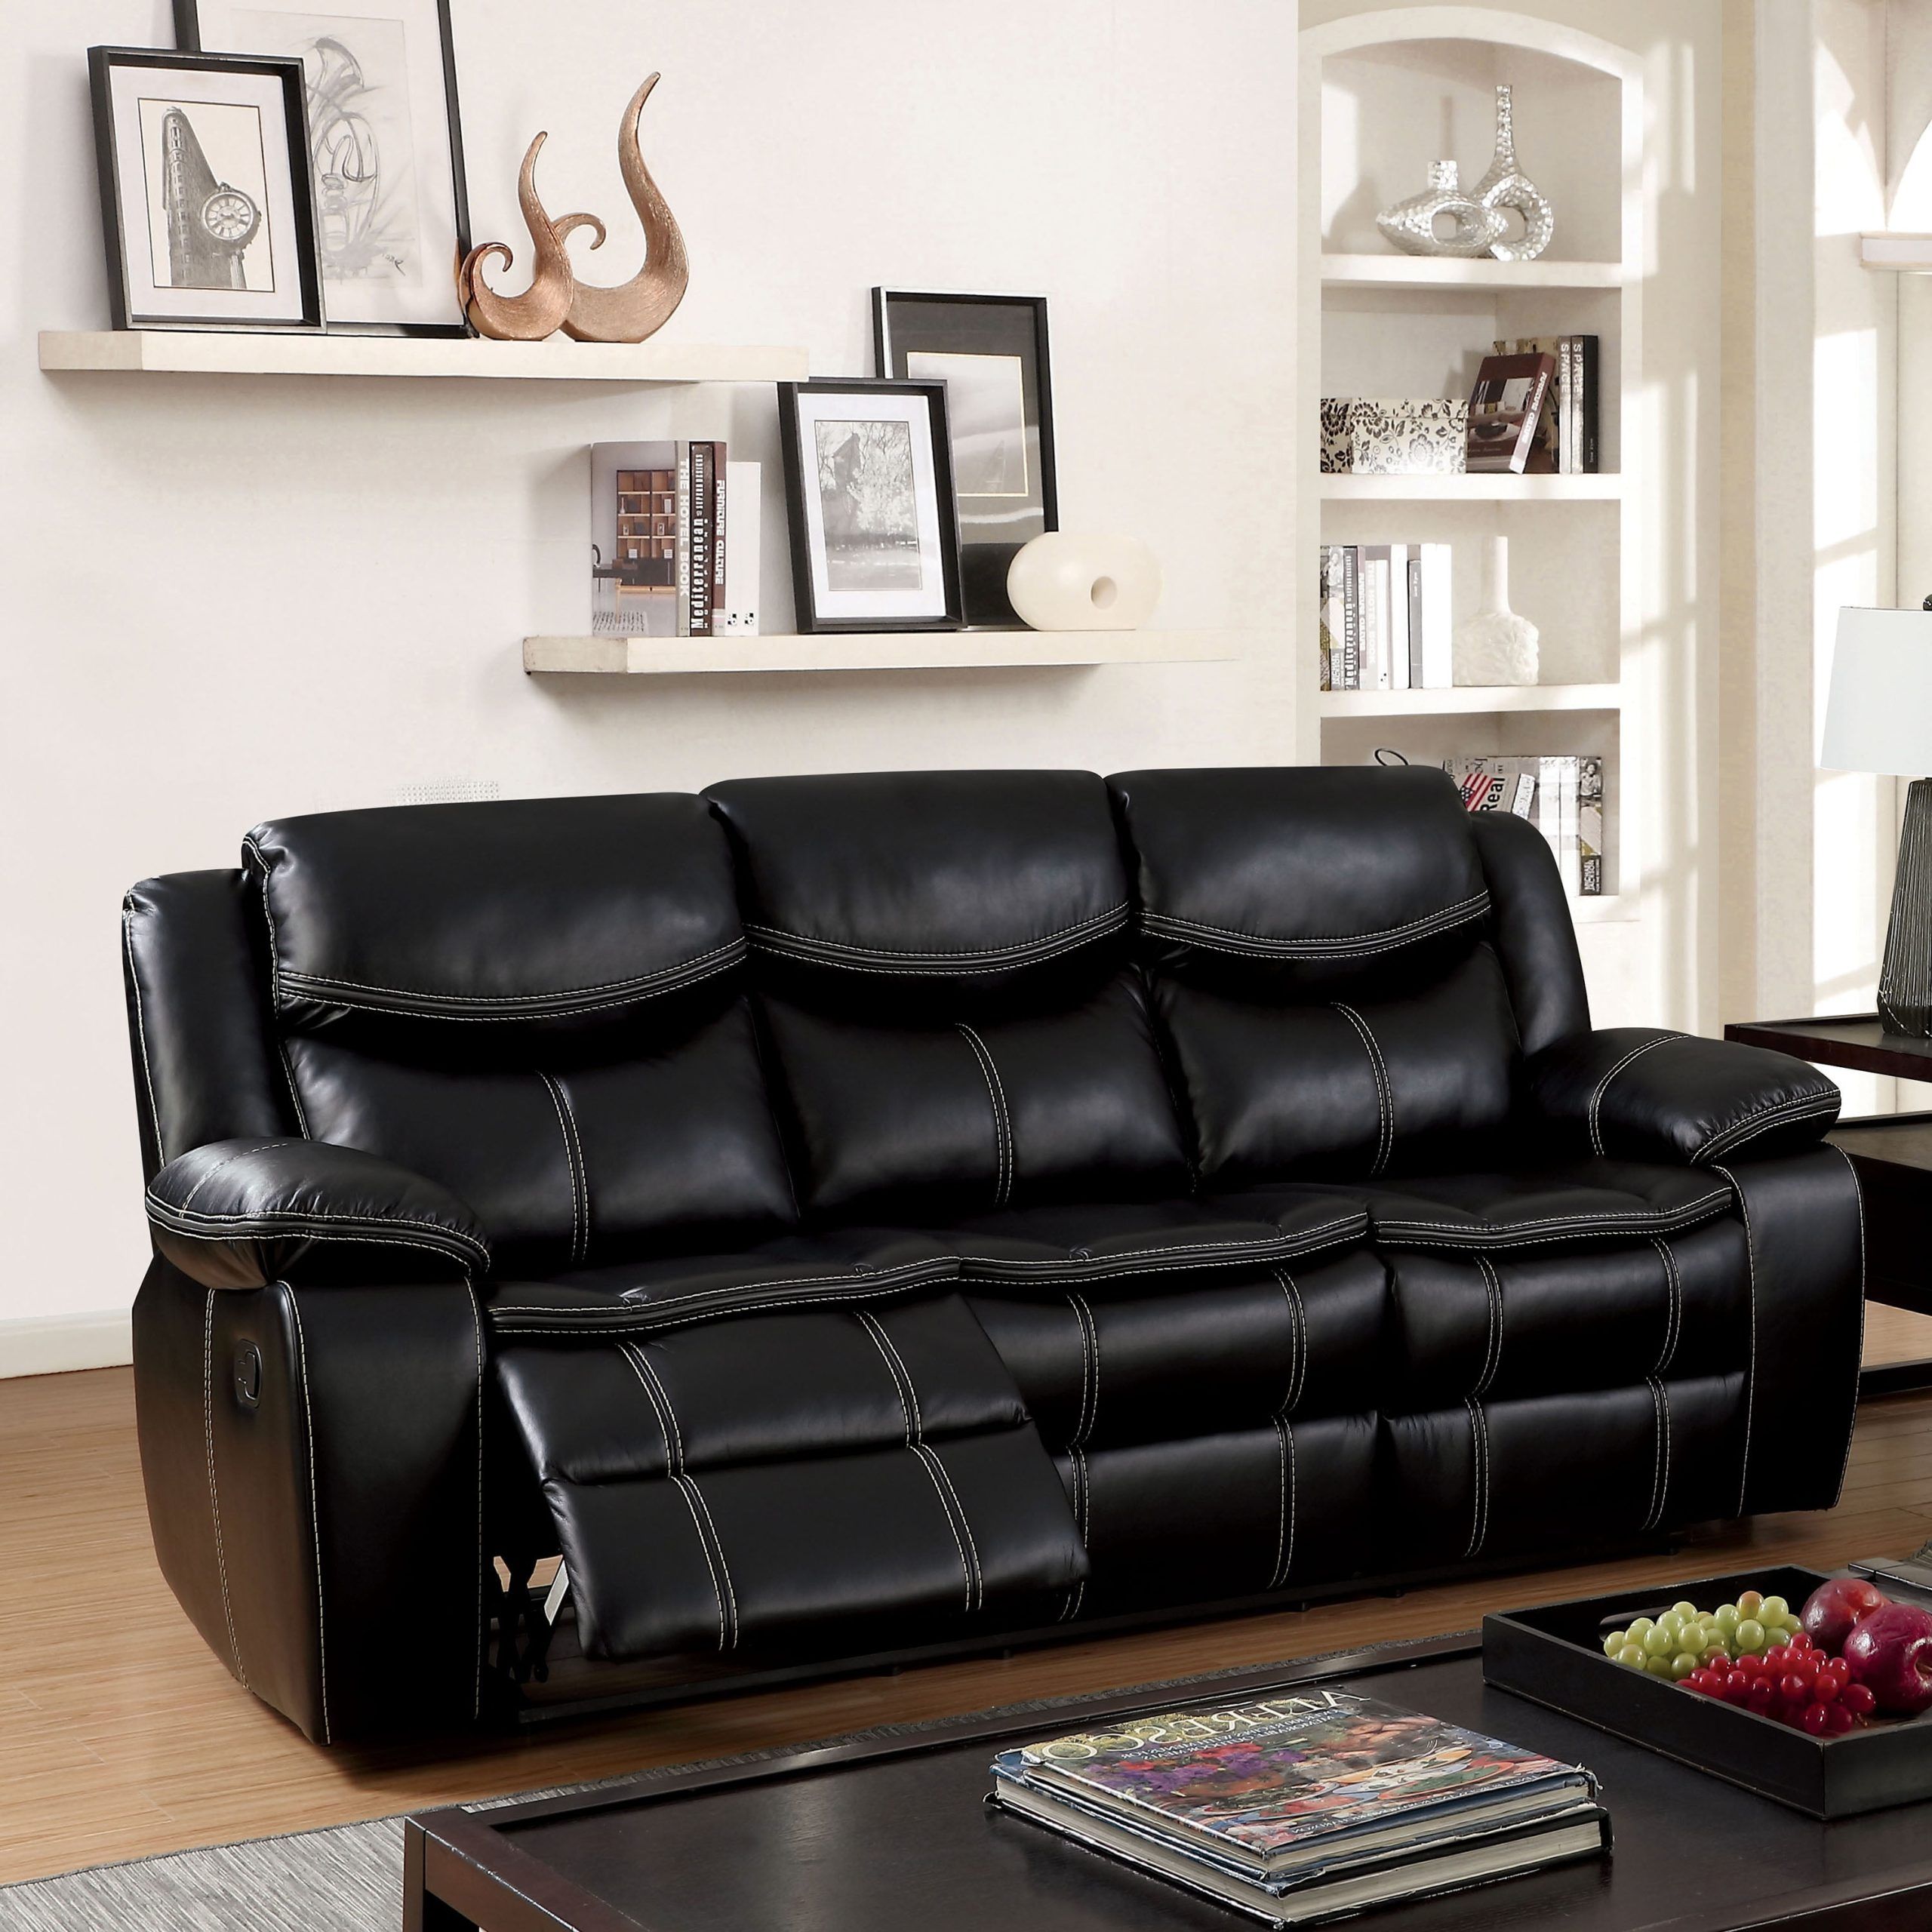 Current Faux Leather Sofas Regarding Furniture Of America Transitional Faux Leather Judson Reclining Sofa (View 14 of 15)